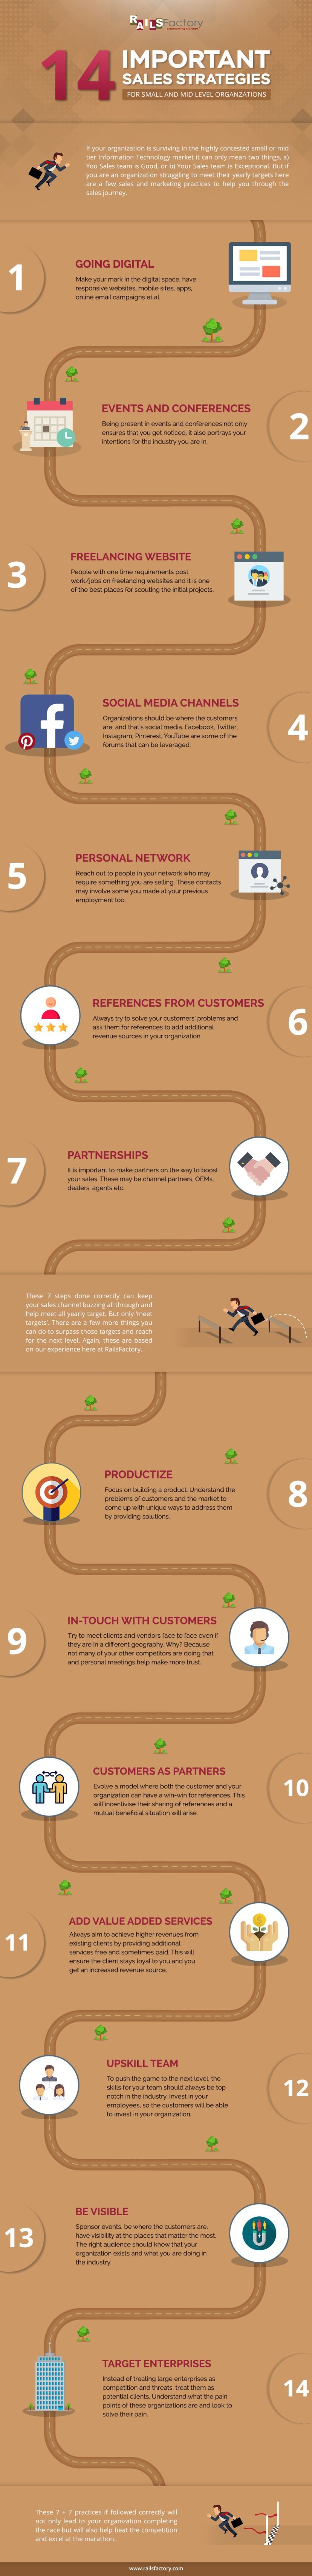 Important Sales Strategies for Small & Mid Level Organizations Infographic